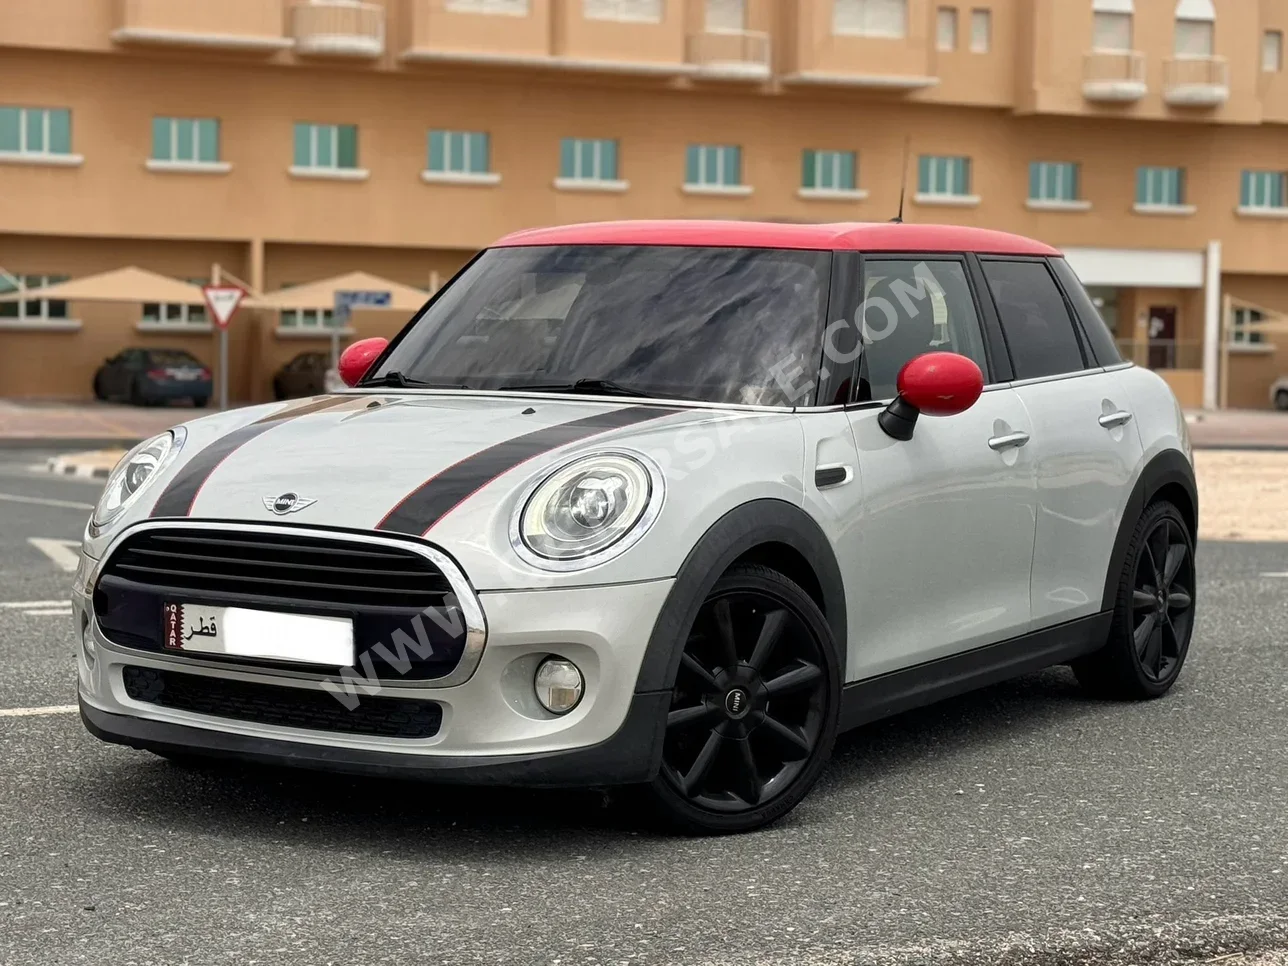 Mini  Cooper  2017  Automatic  105,000 Km  3 Cylinder  Front Wheel Drive (FWD)  Hatchback  White